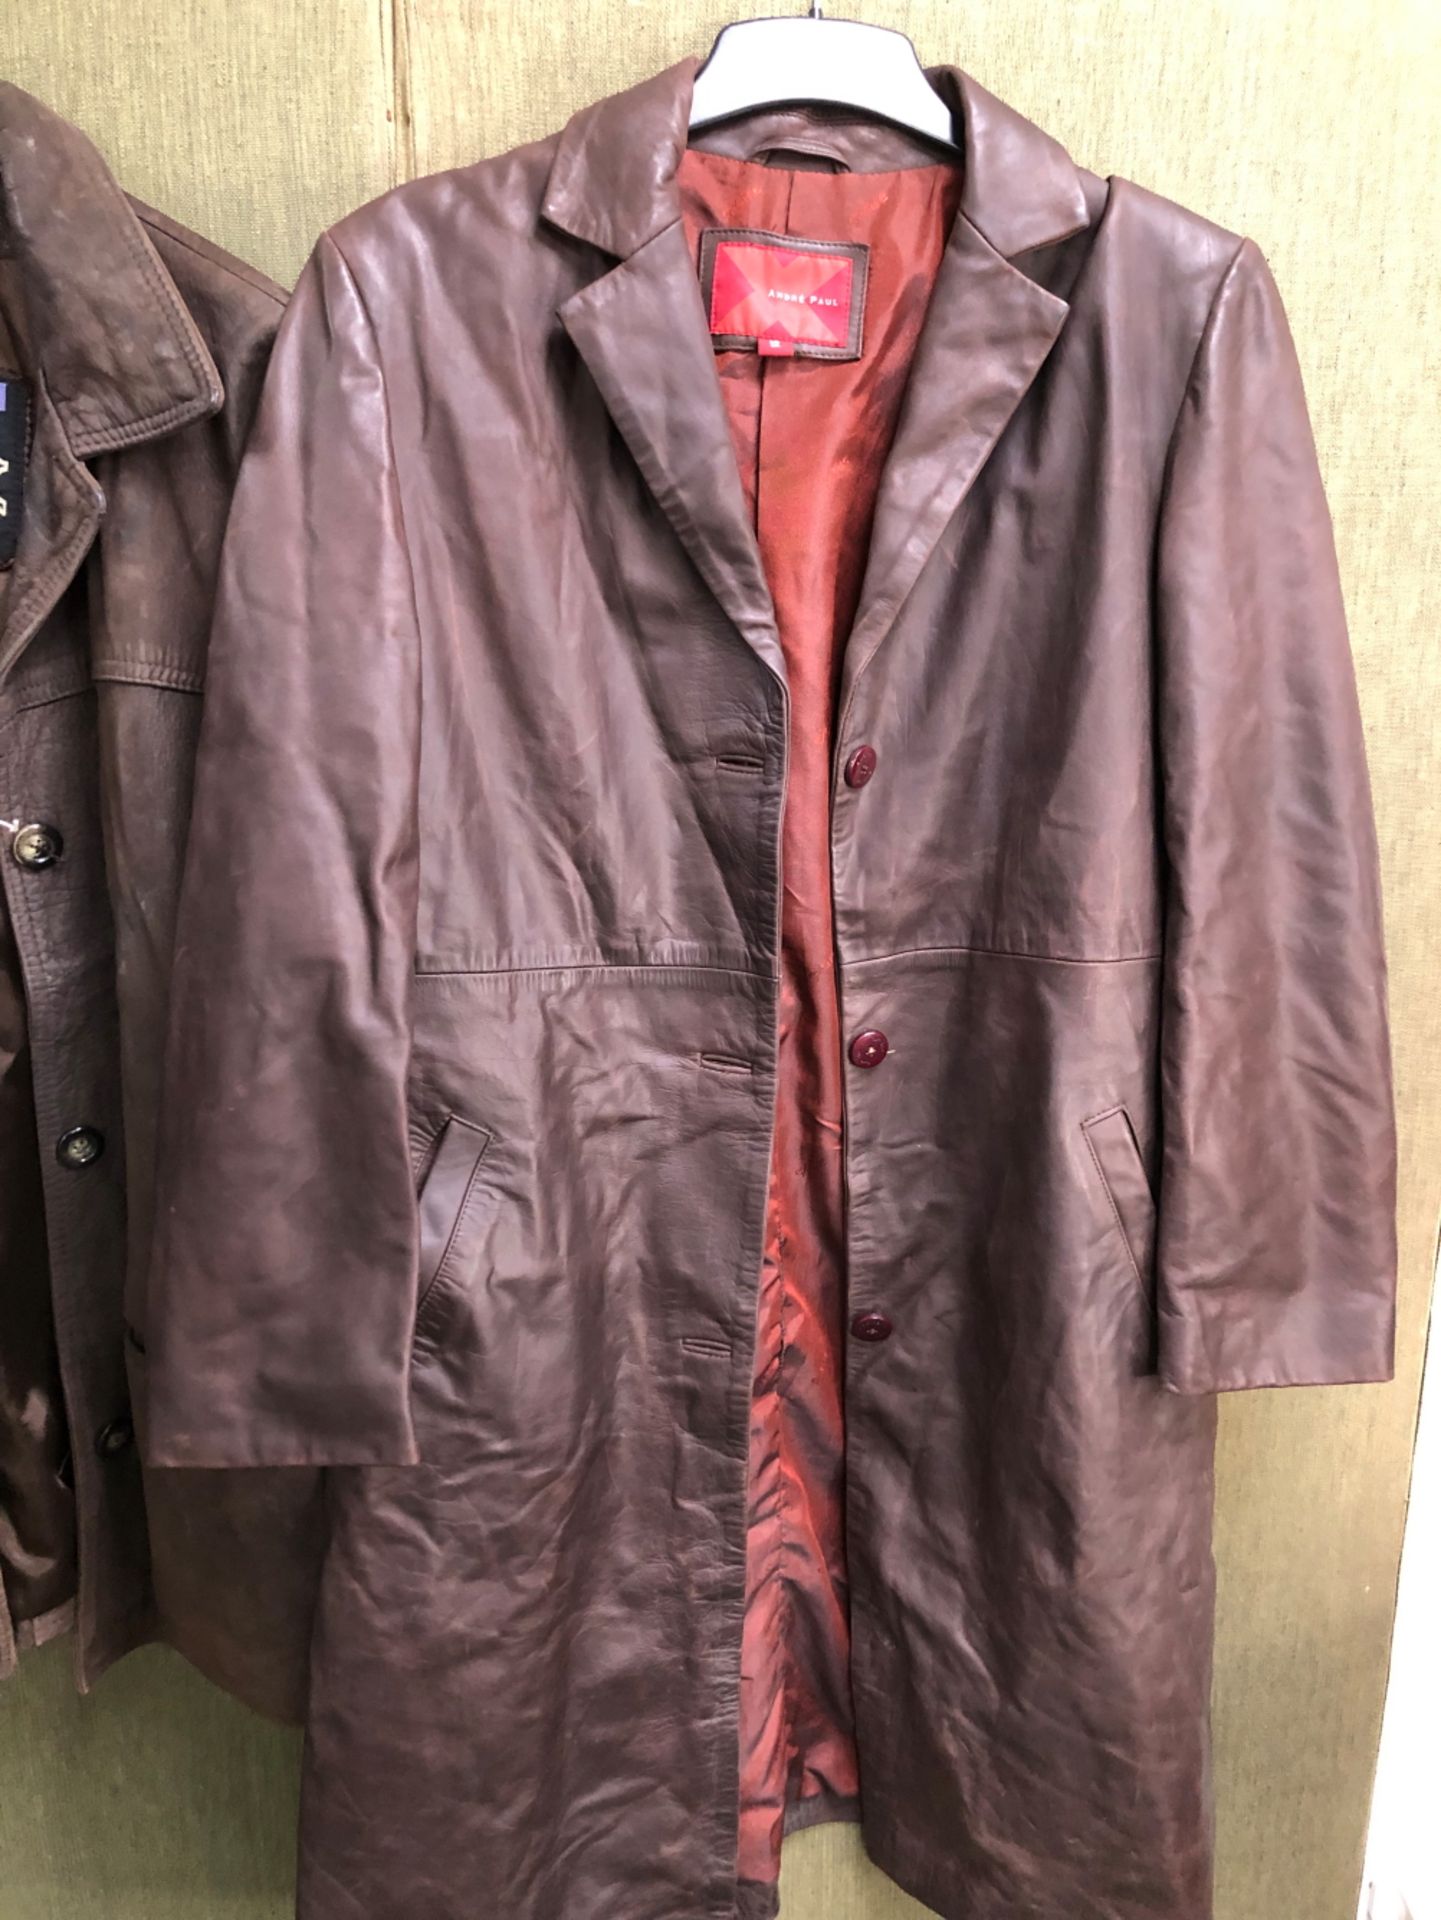 JACKET. A BROWN LEATHER JACKET, EXCLUSIVE LEATHER BY L.L DIRECT, SIZE STATED 12, PIT TO PIT 51cms, - Image 2 of 8